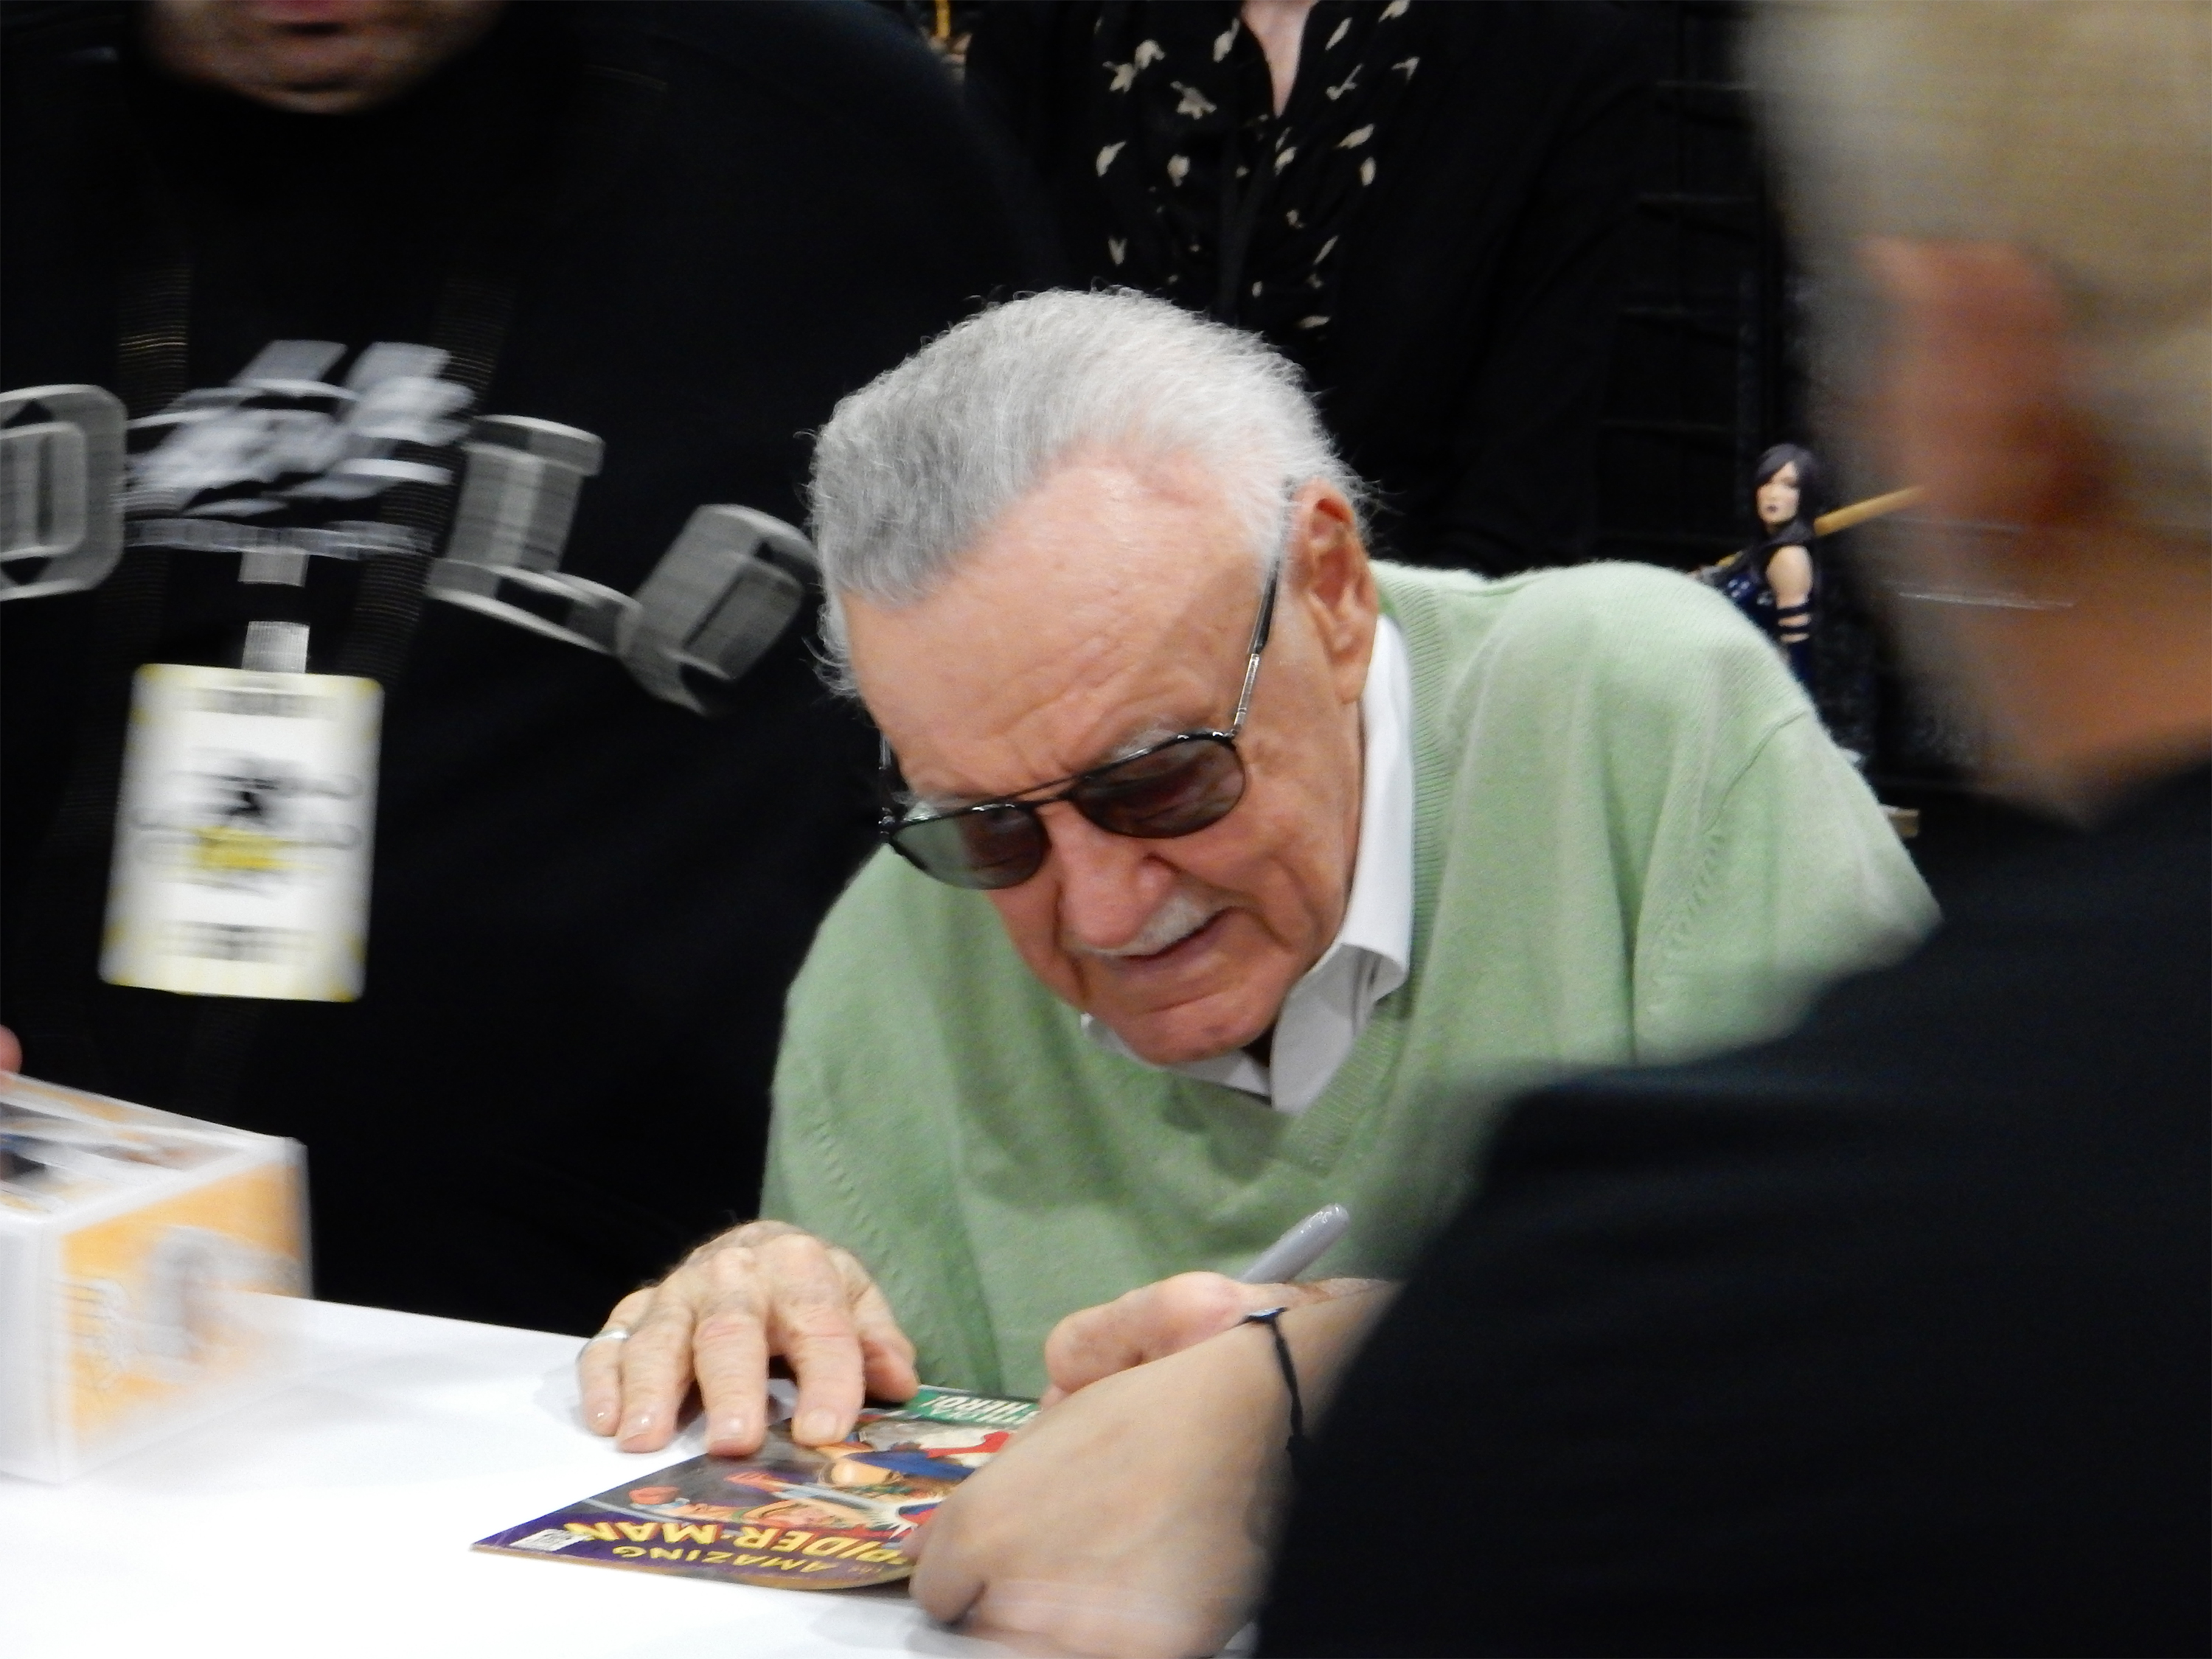 Stan Lee doing what he enjoys most and spending time with his fans as he autographs memorabilia.  Photography by Anne Hall of Syrenia Imagery.